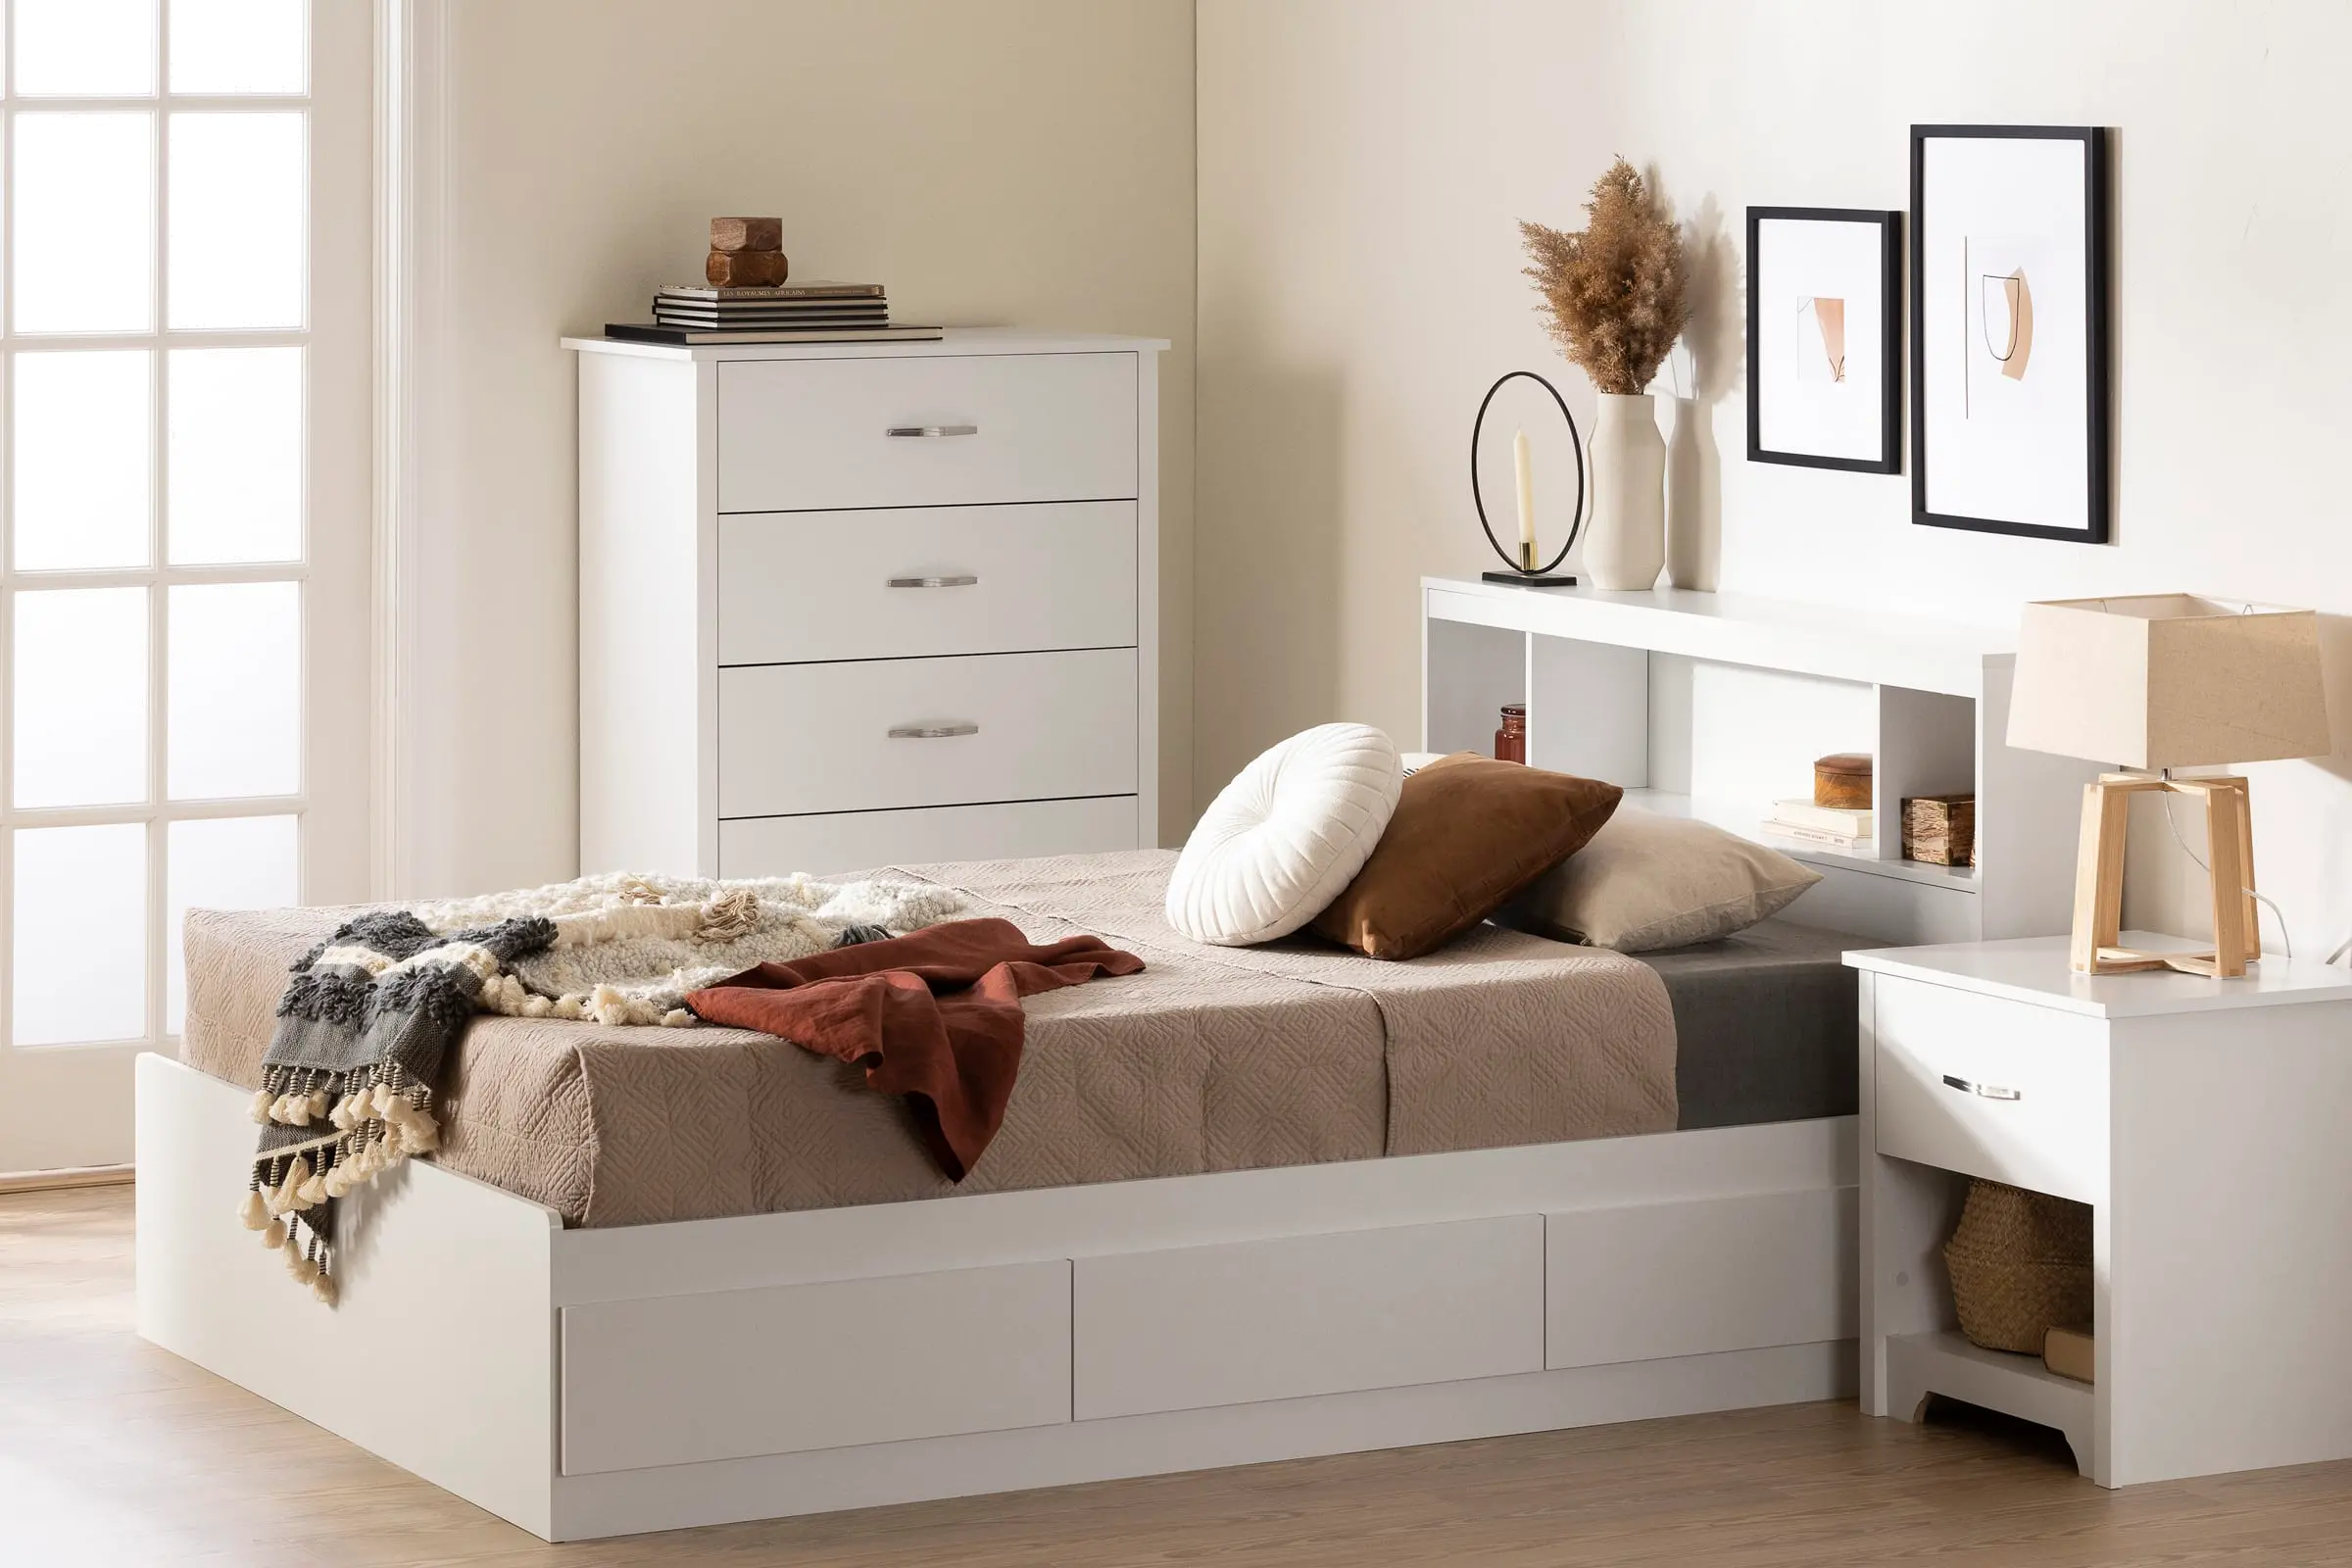 15131 Fusion White Full Bed and Headboard Set - South Sh sku 15131